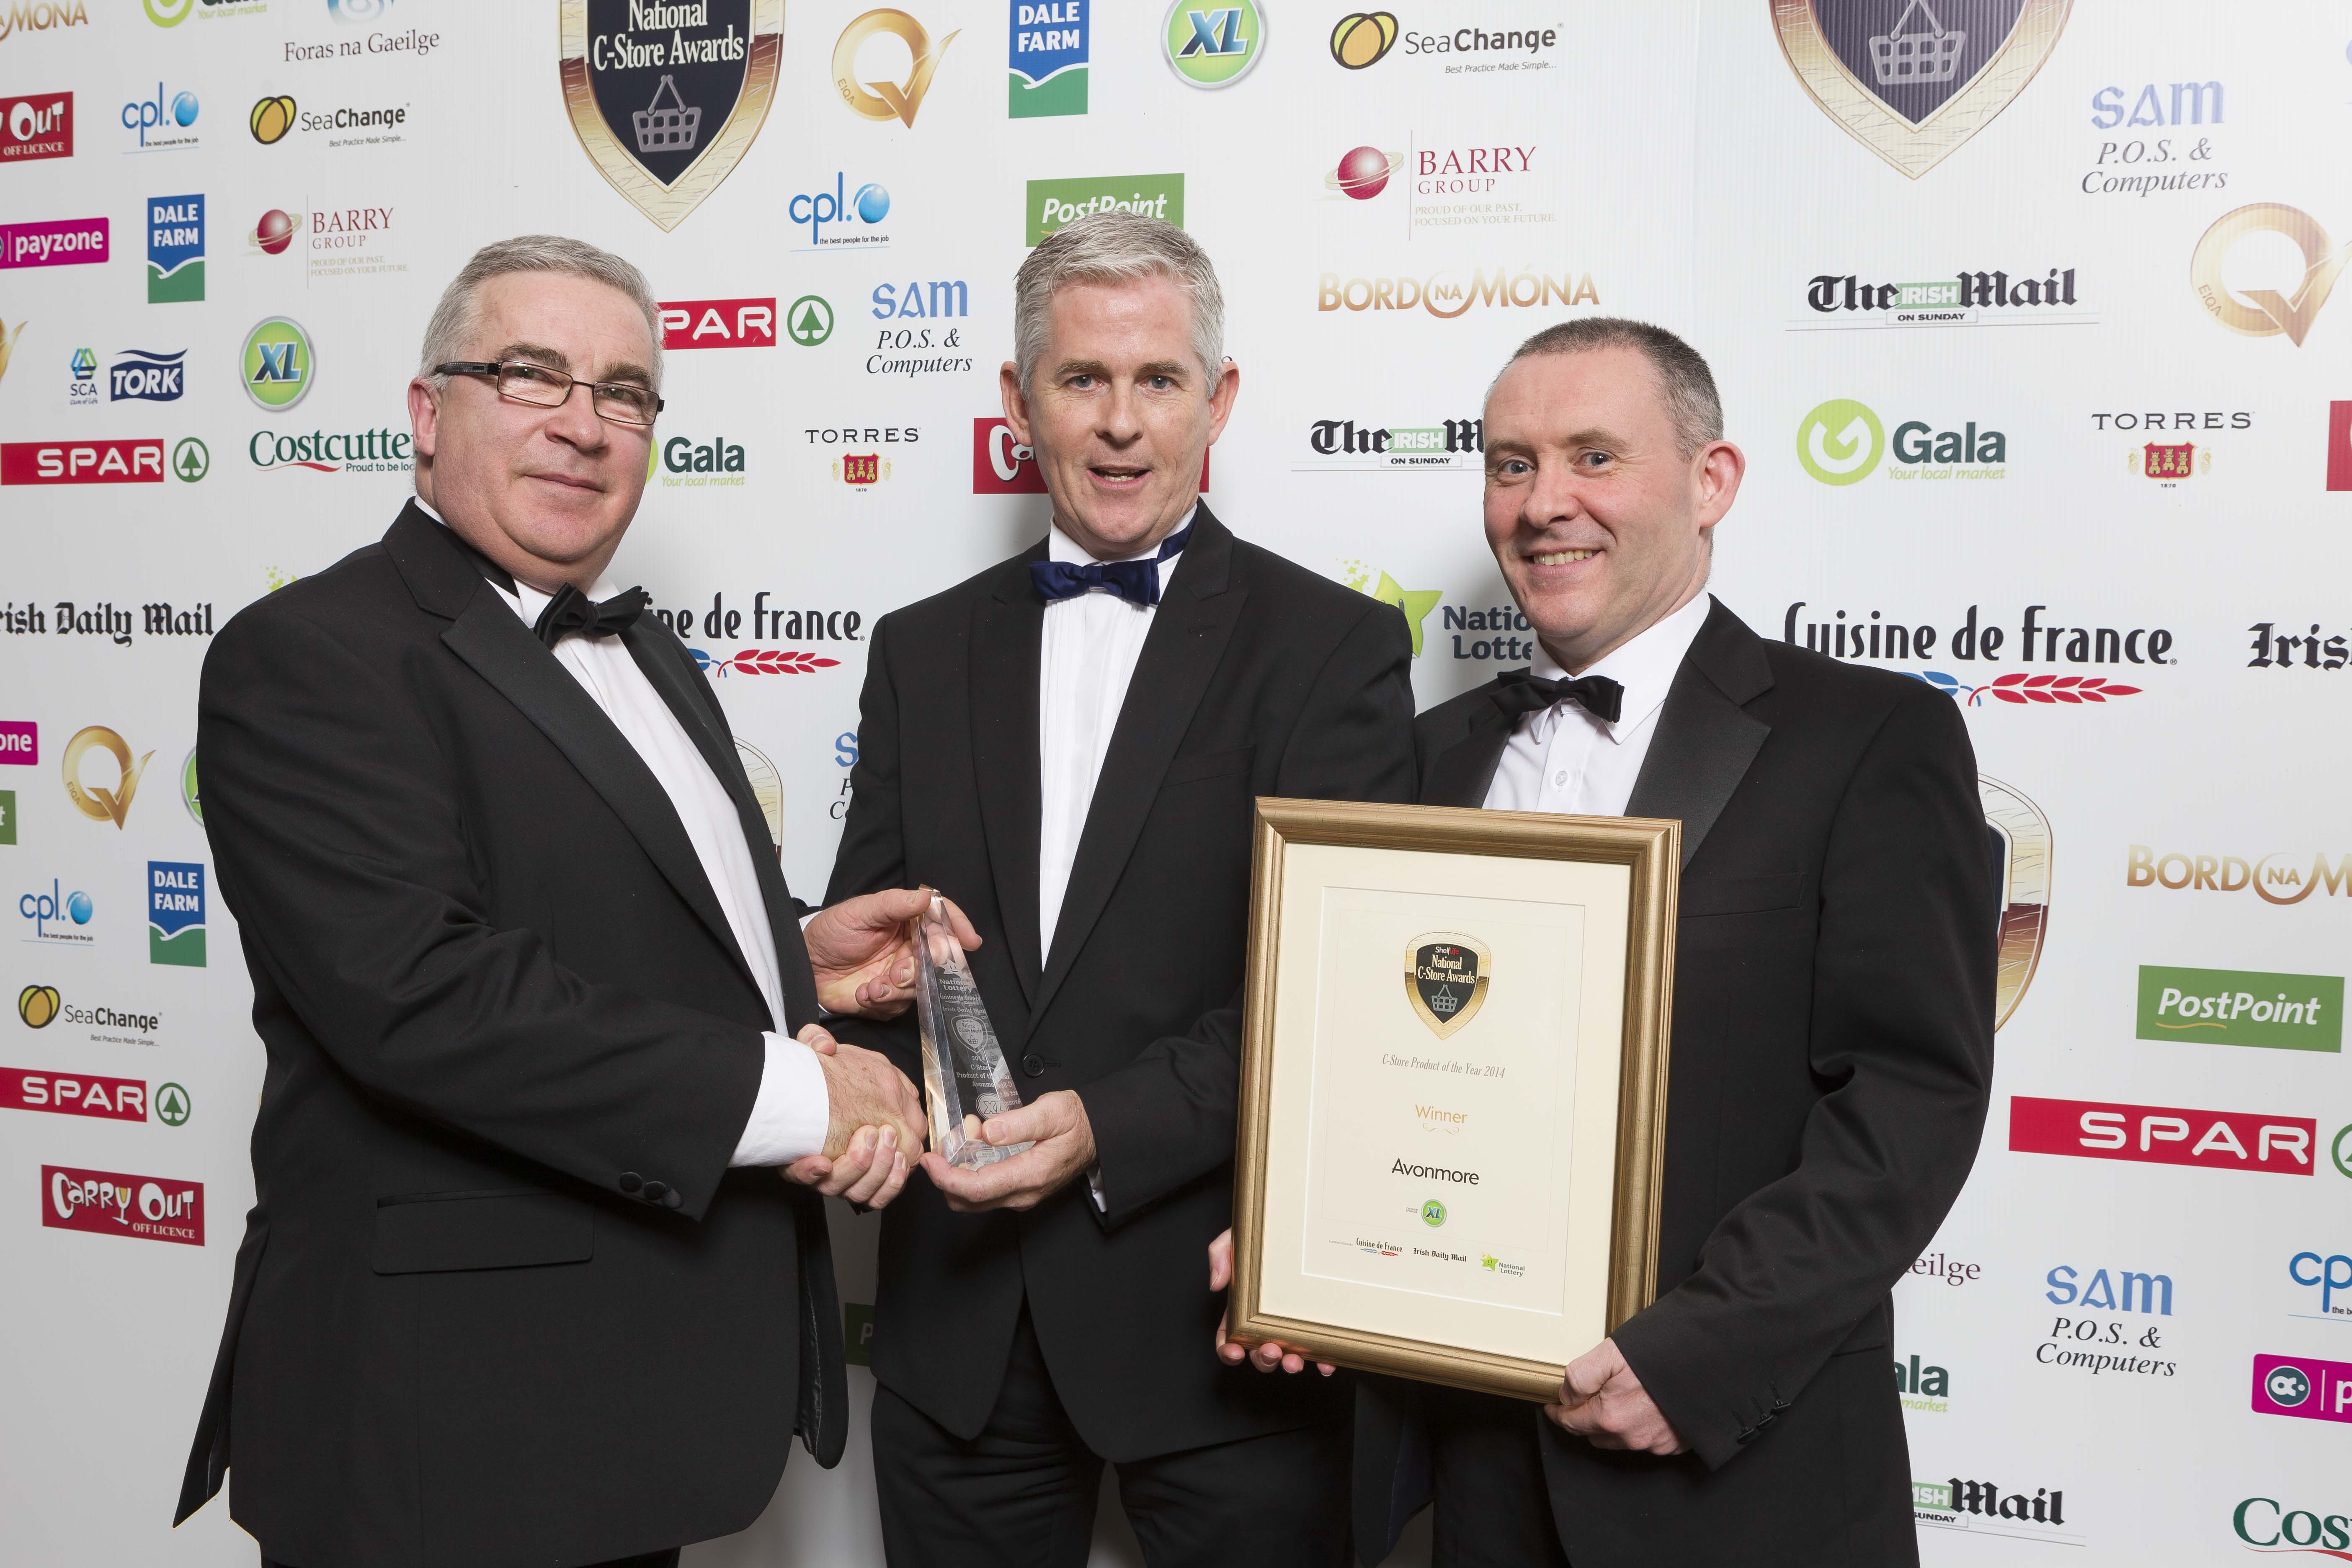 Colm Fitzsimons, national XL business development manager, presents the award for C-Store Product of the Year to Adrian Tiernan and Declan Fennelly of Avonmore